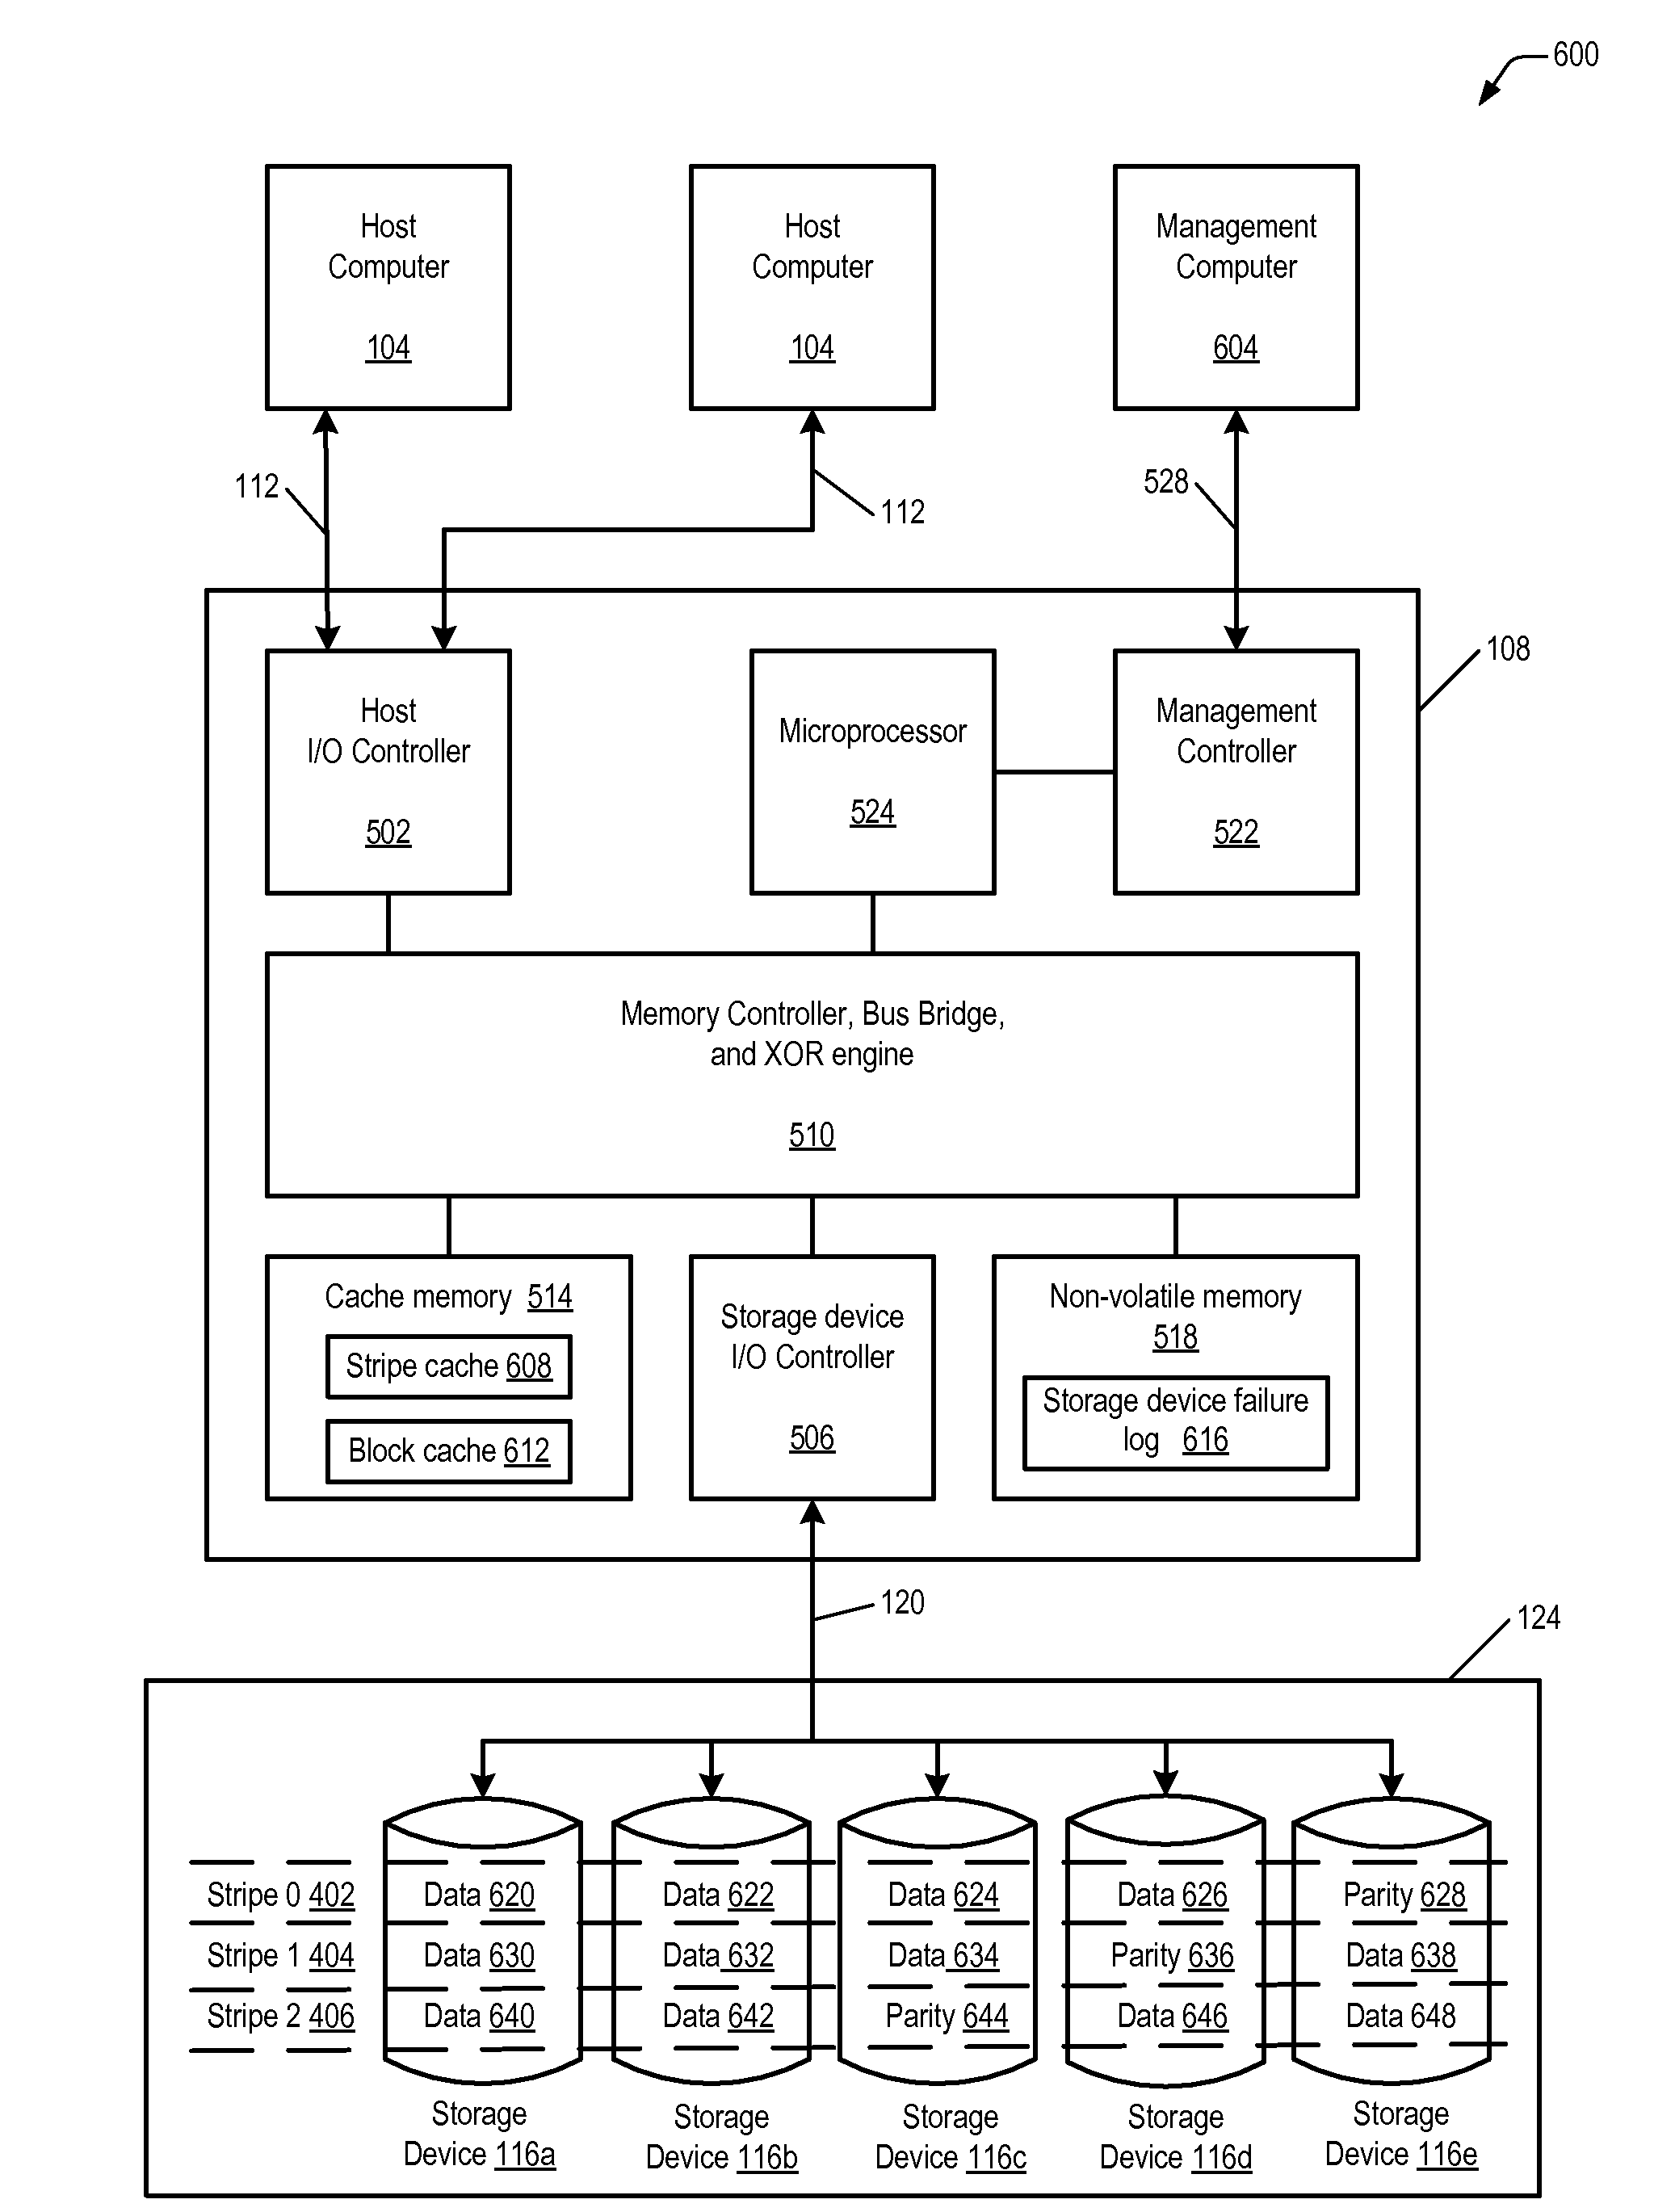 Apparatus and method for identifying disk drives with unreported data corruption